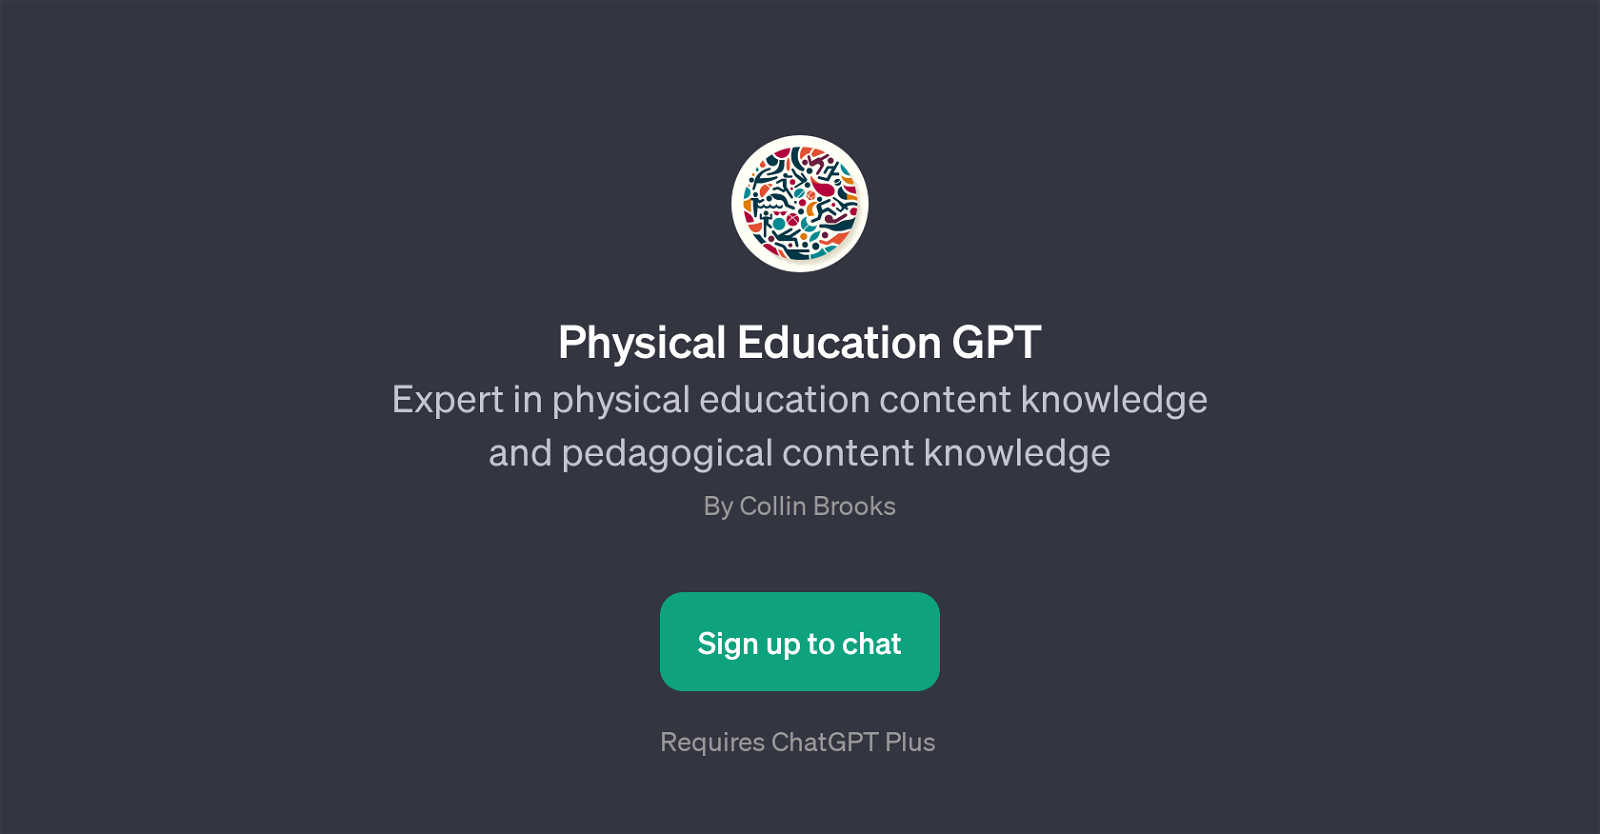 Physical Education GPT website